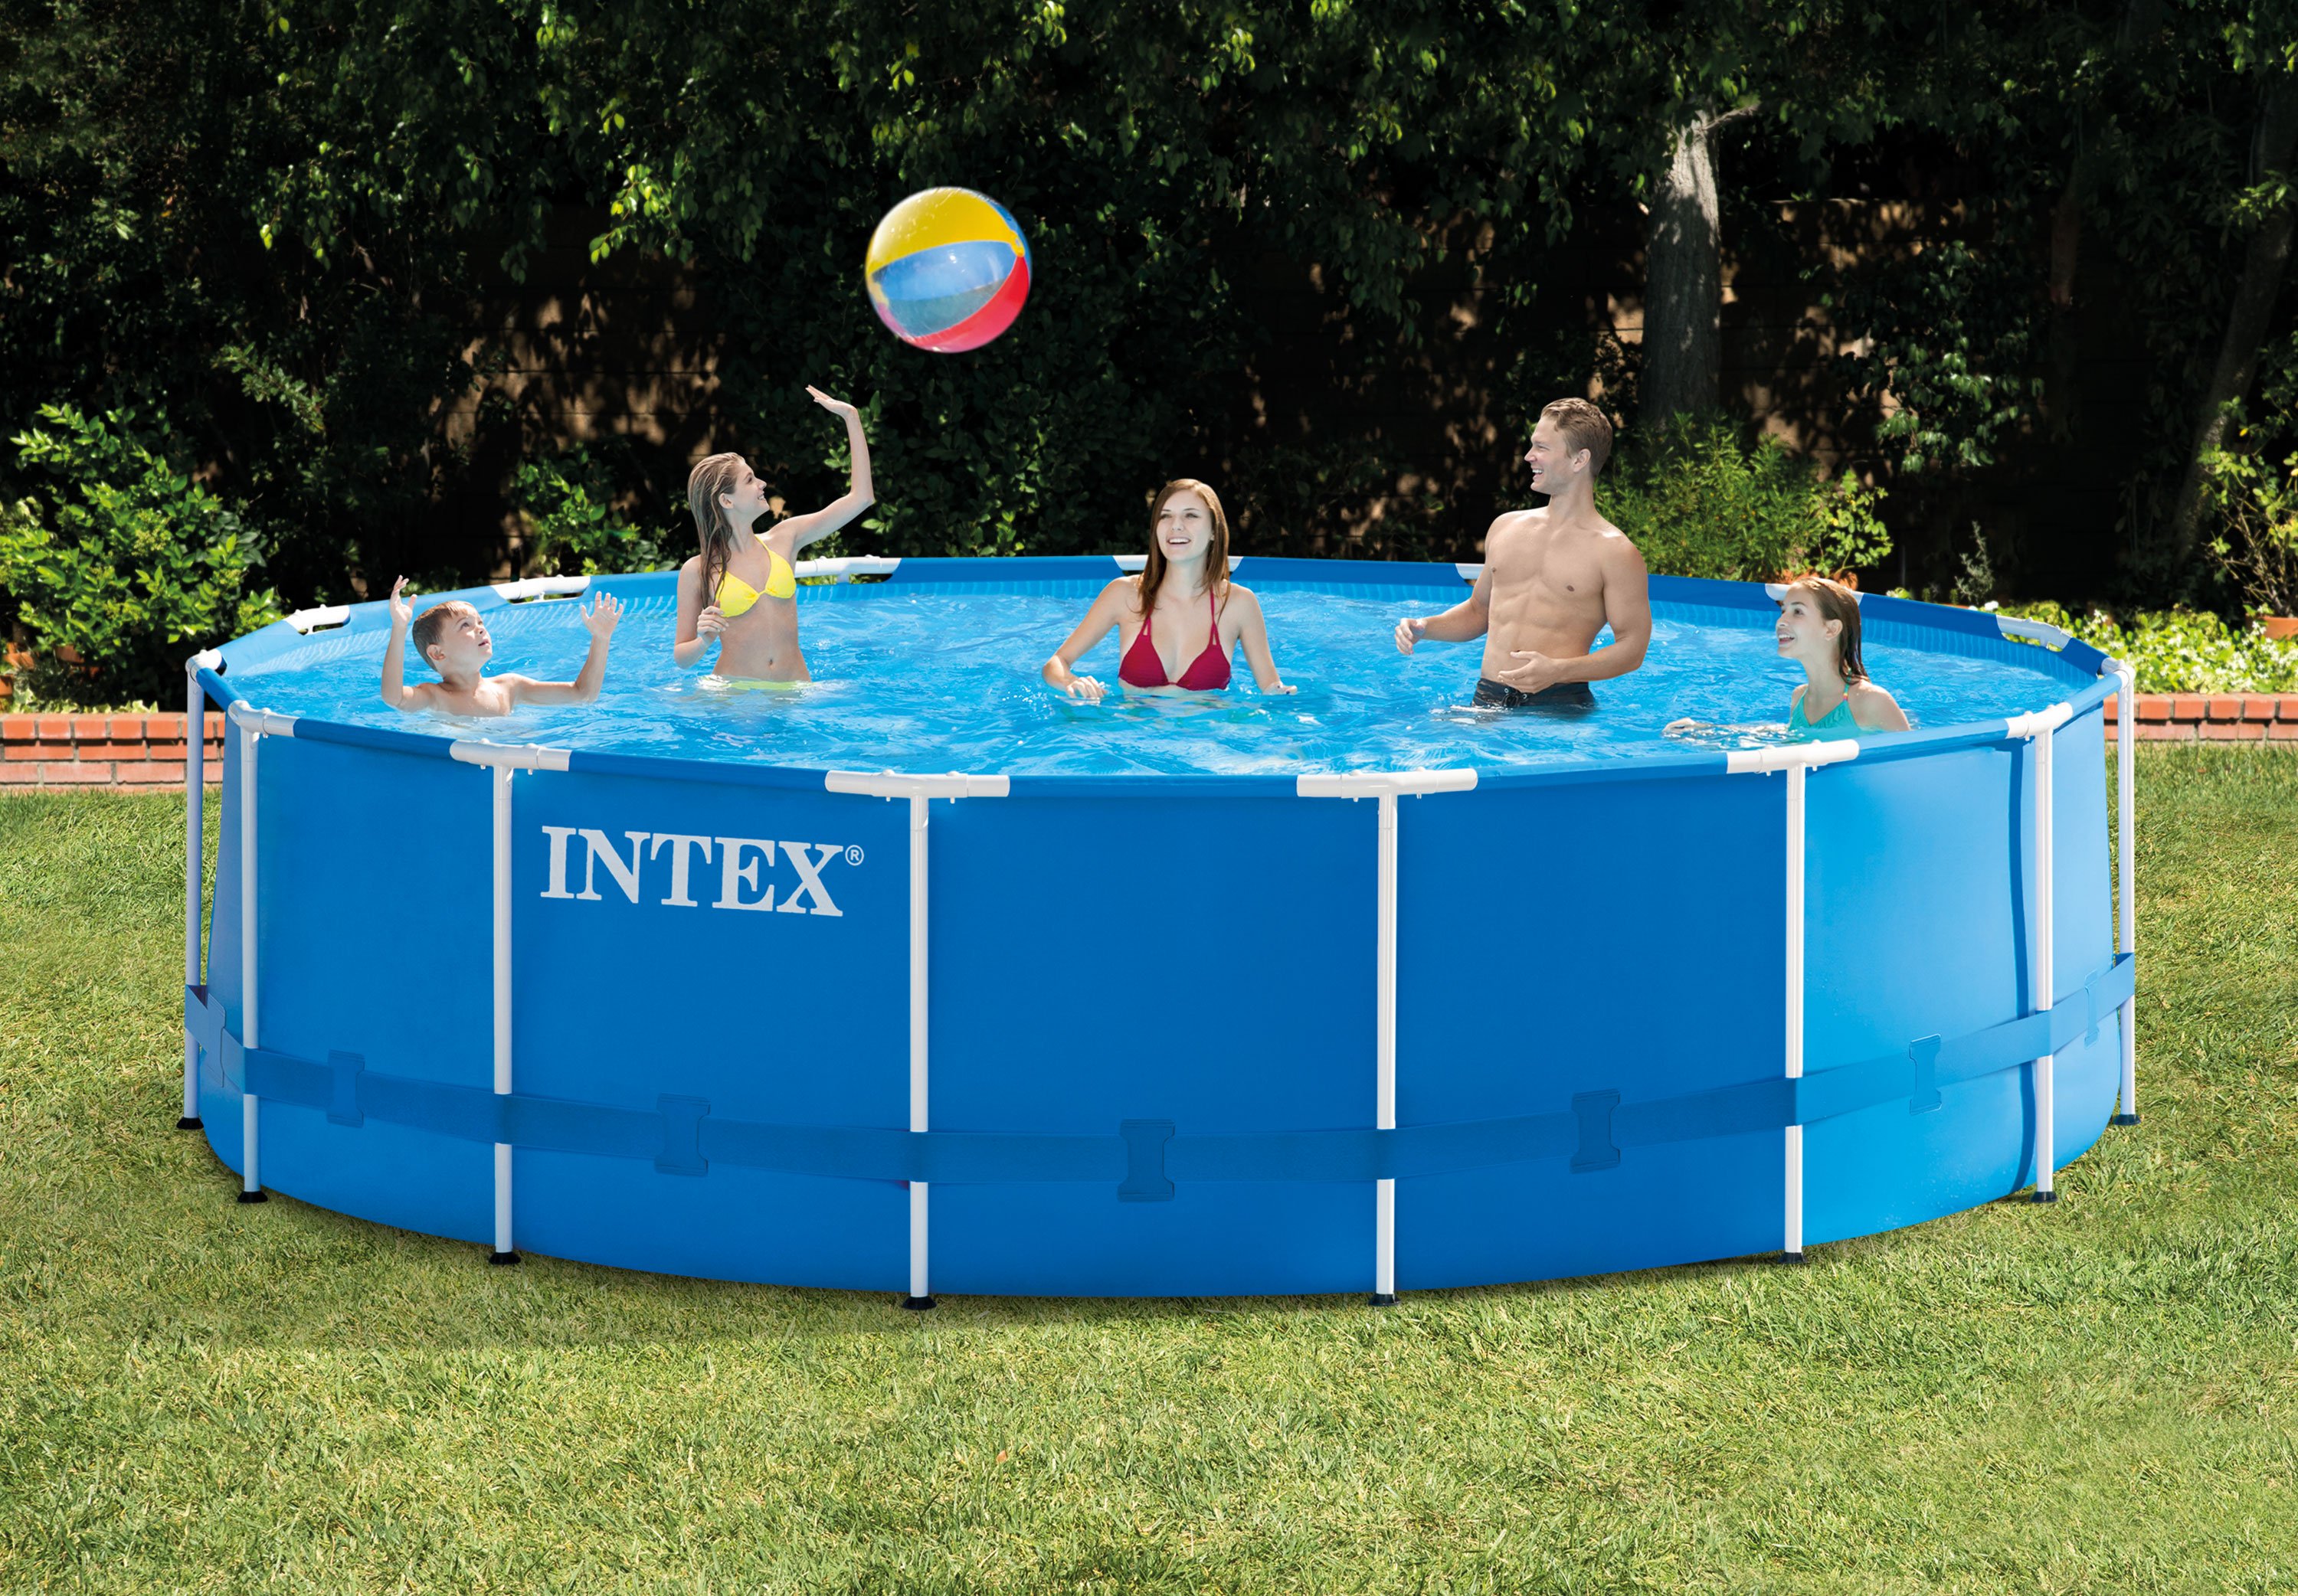 Intex 15' x 48" Metal Frame Above Ground Pool with Filter Pump - image 4 of 7